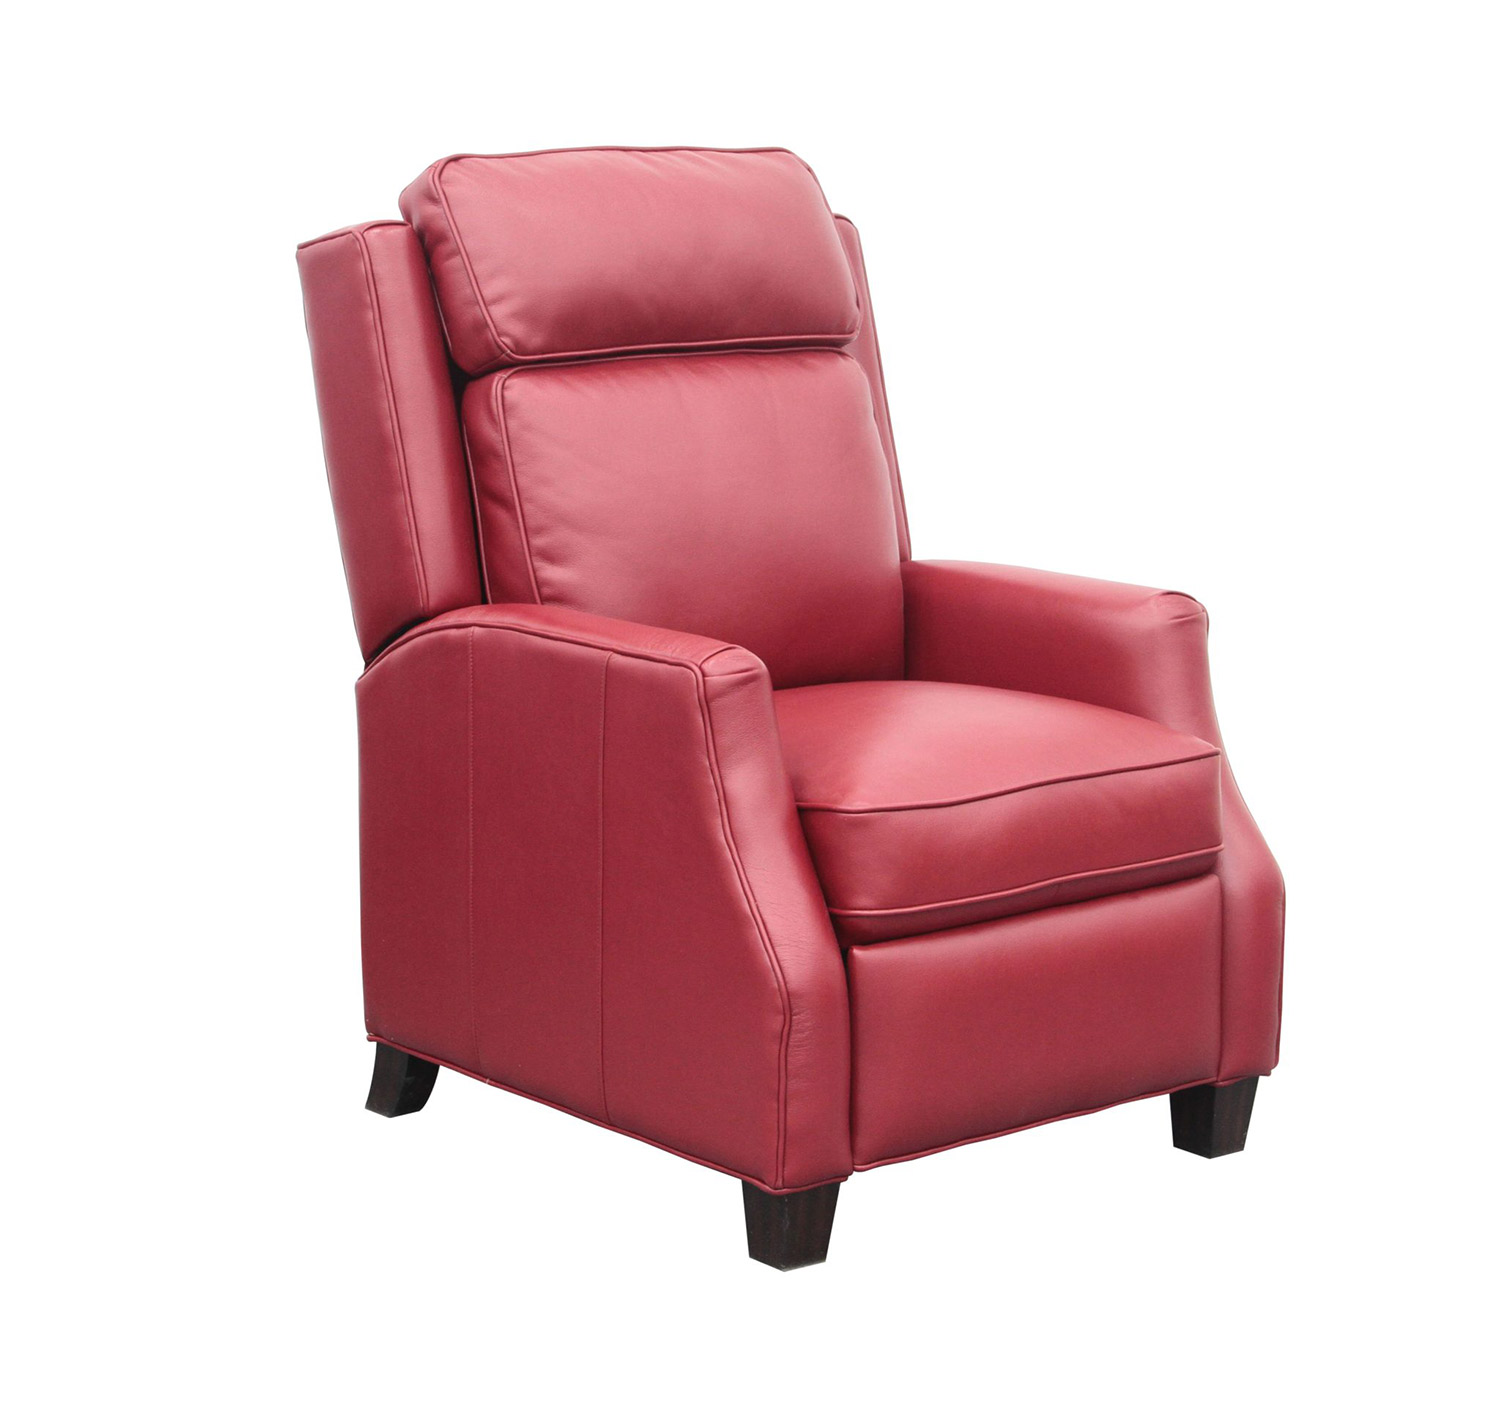 Barcalounger Nixon Recliner Chair - Blanche Fire Red performance fabric